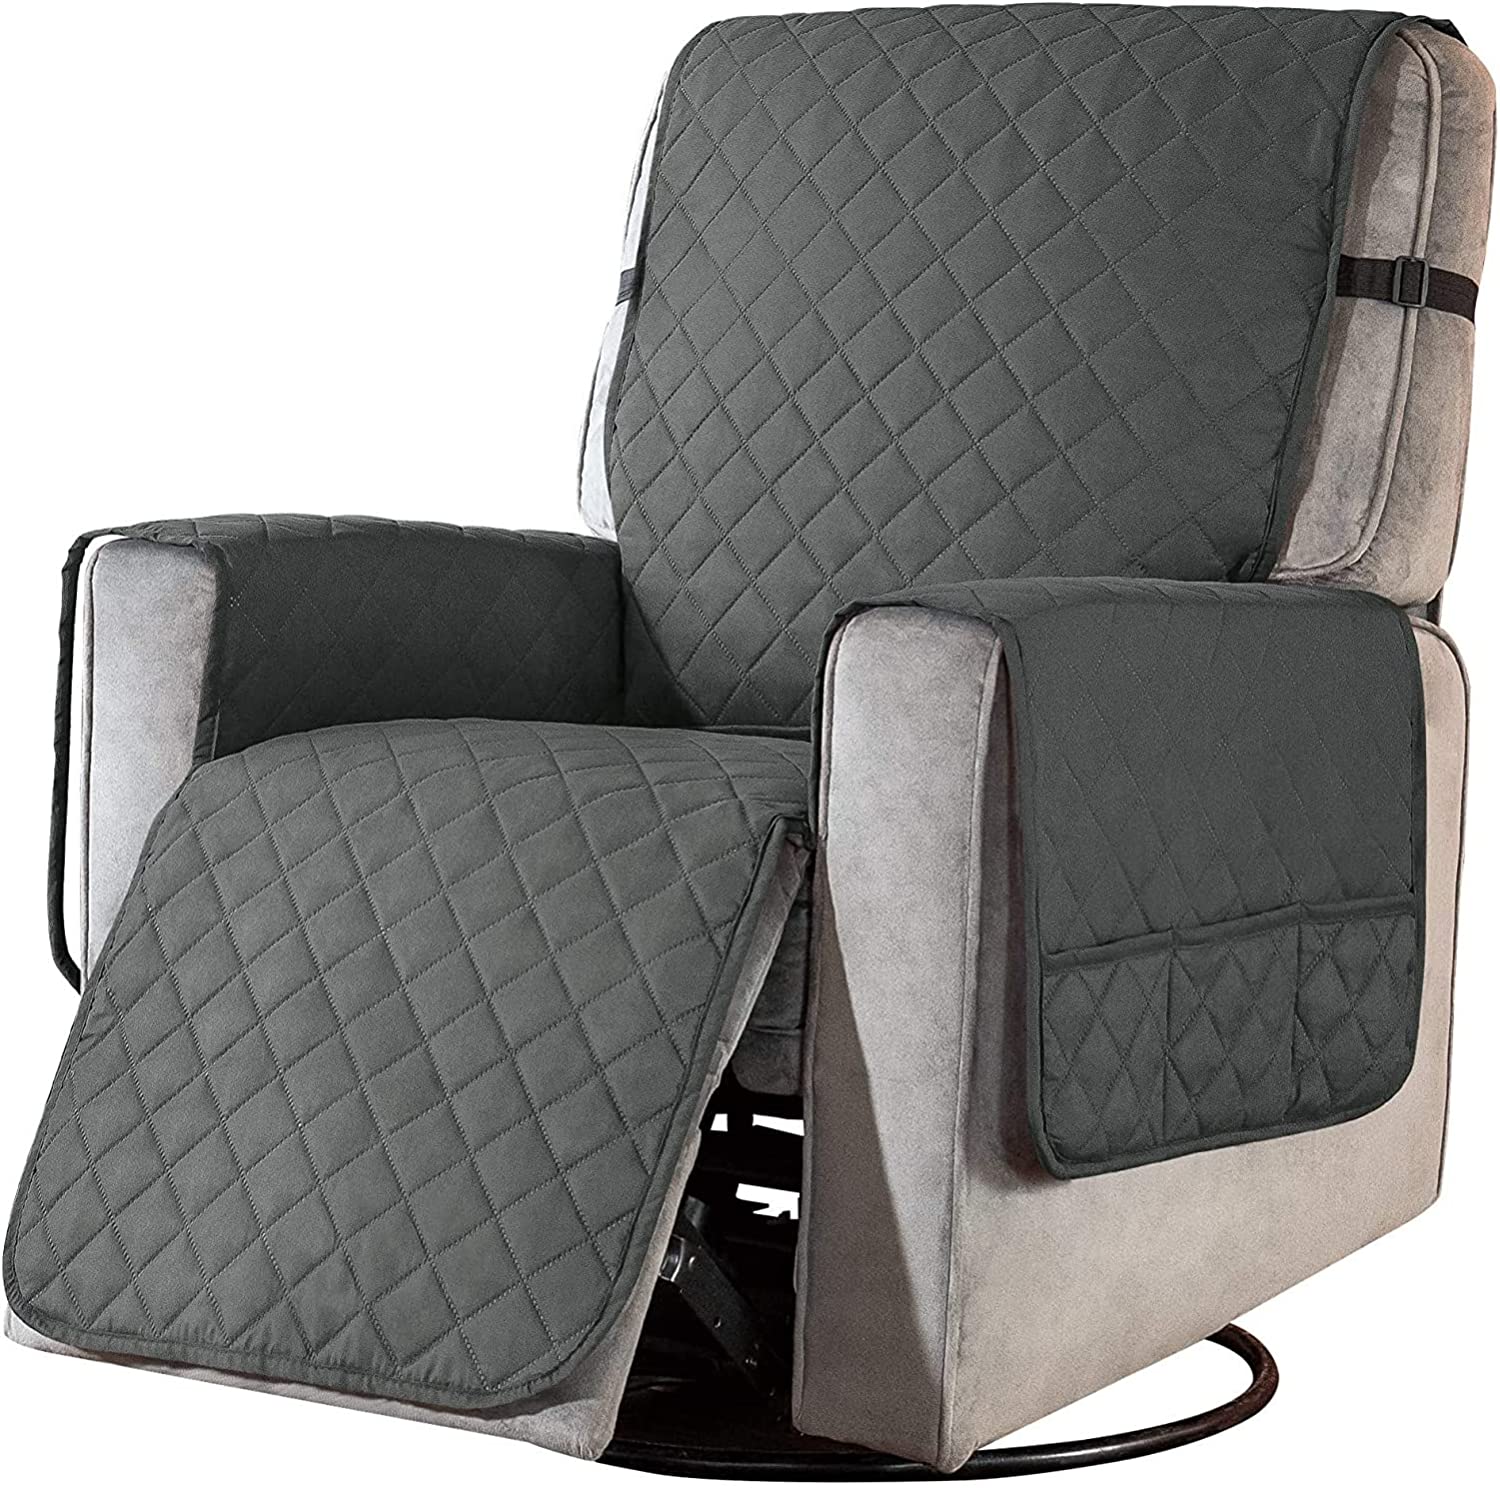 FLOOFI Pet Sofa Cover Recliner Chair S Size with Pocket (Grey) FI-PSC-117-BY